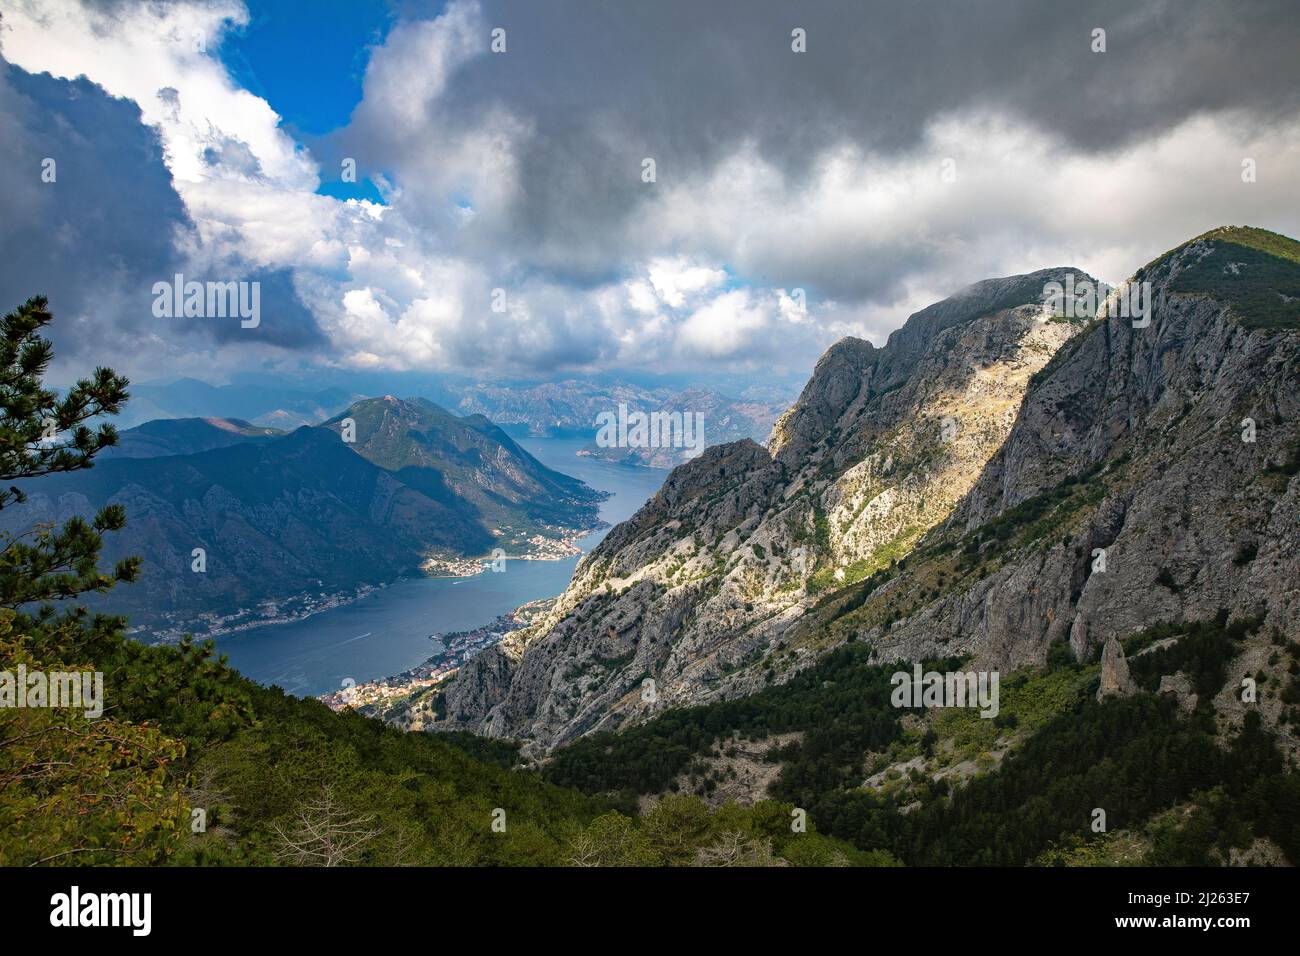 View of the bay of Kotor, Montenegro Stock Photo